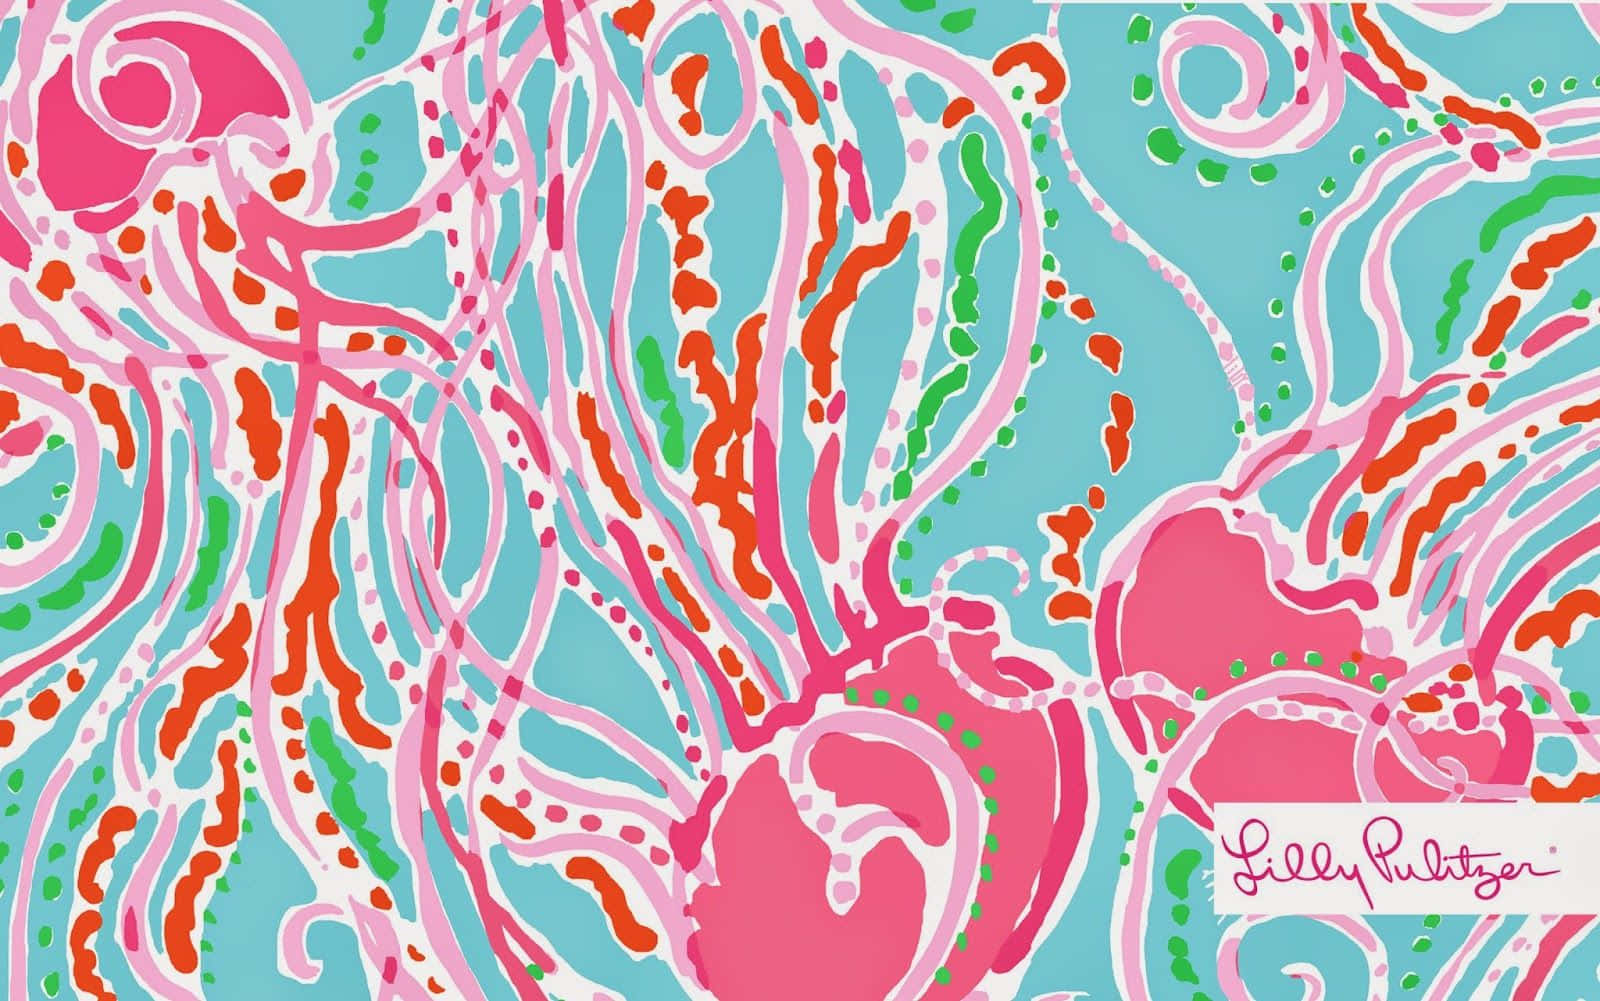 Show off your preppy style with Lilly Pulitzer clothing!